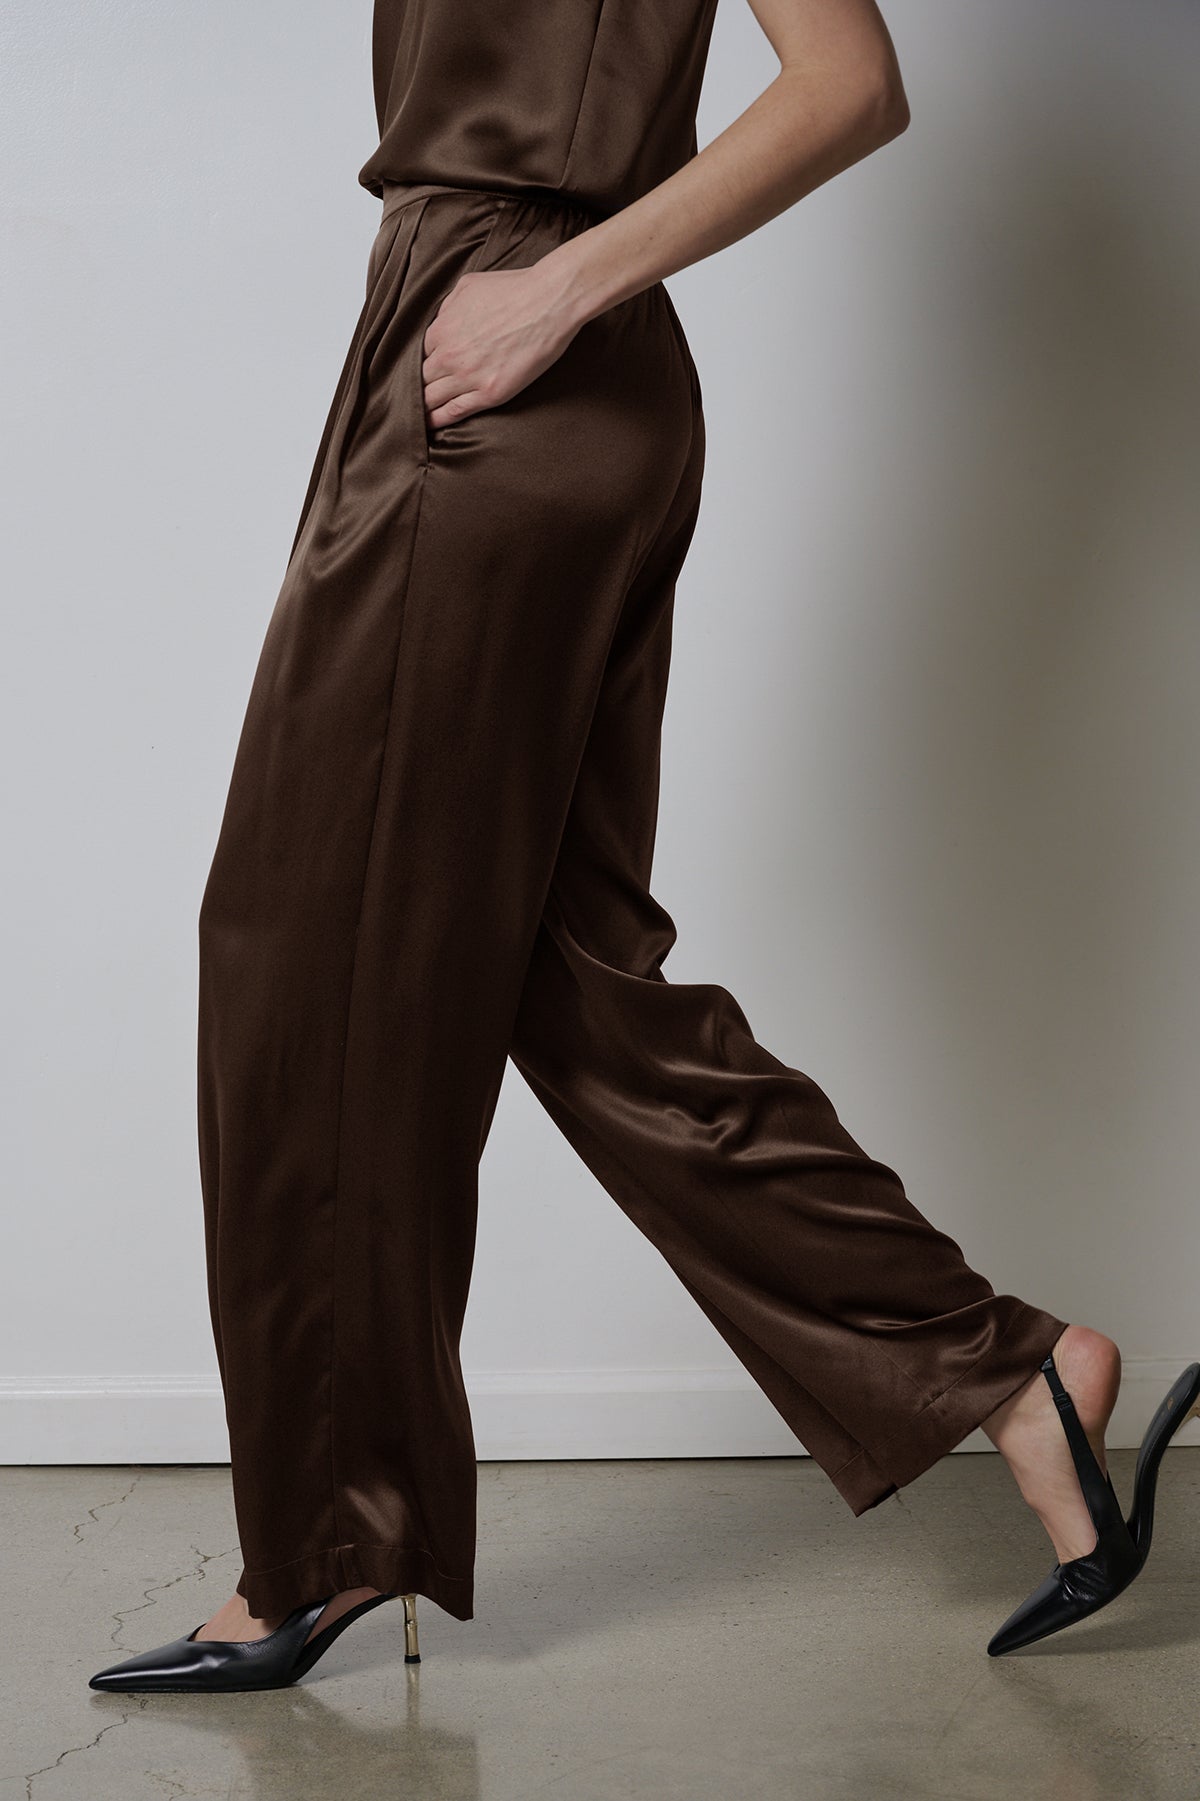 The model is wearing a brown silk Manhattan pant by Velvet by Jenny Graham.-35547440873665